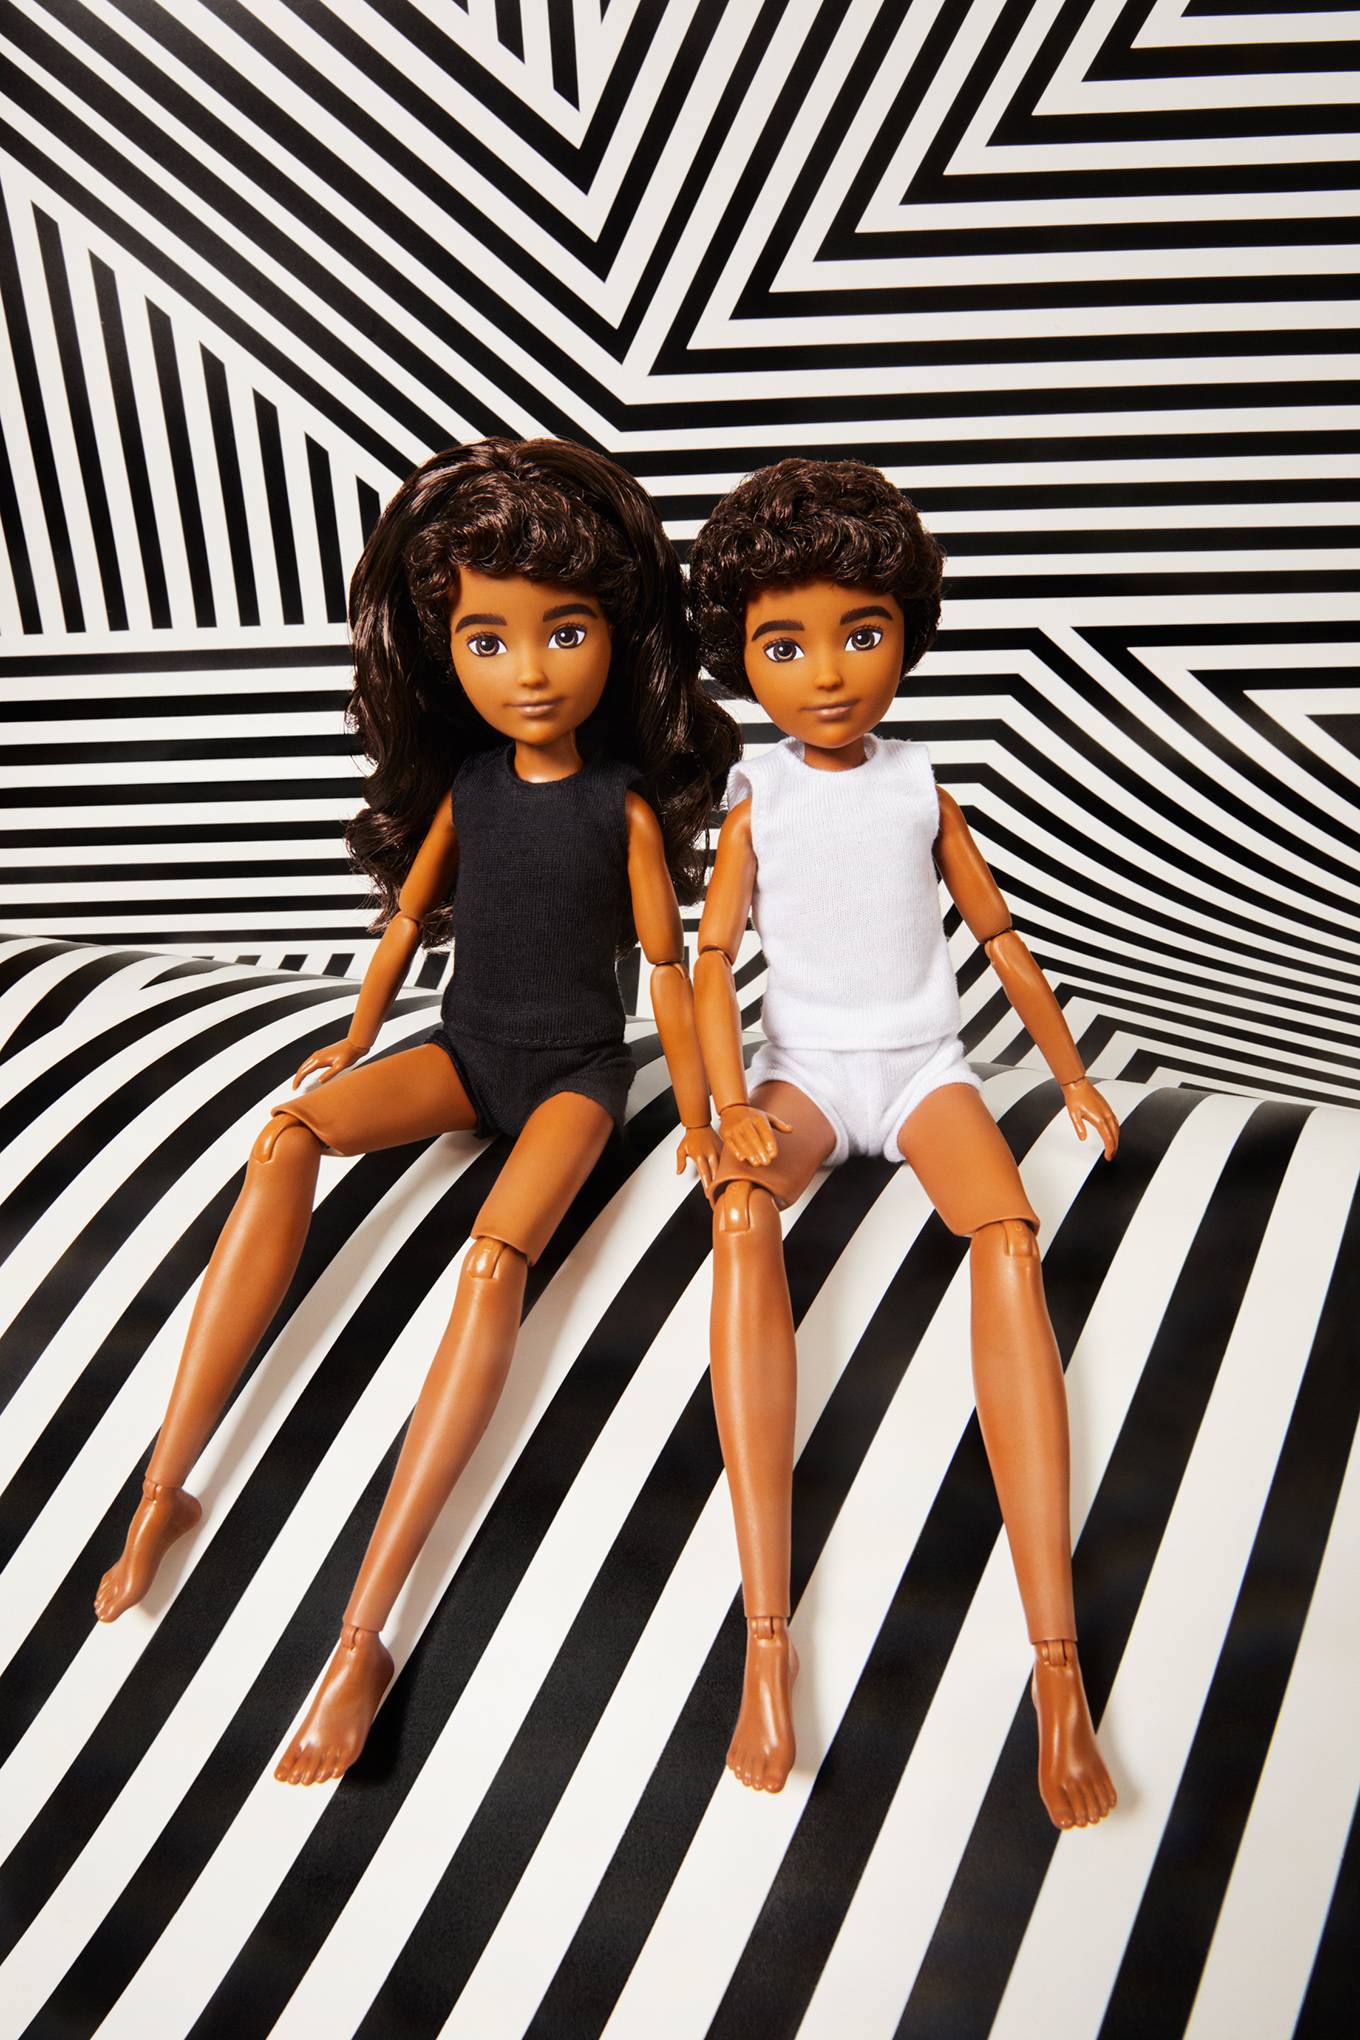 Mattel, which calls this the world’s first gender-neutral doll, is hoping its launch redefines who gets to play with a toy traditionally deemed taboo for half the world’s kids. (Photograph by JUCO for TIME)